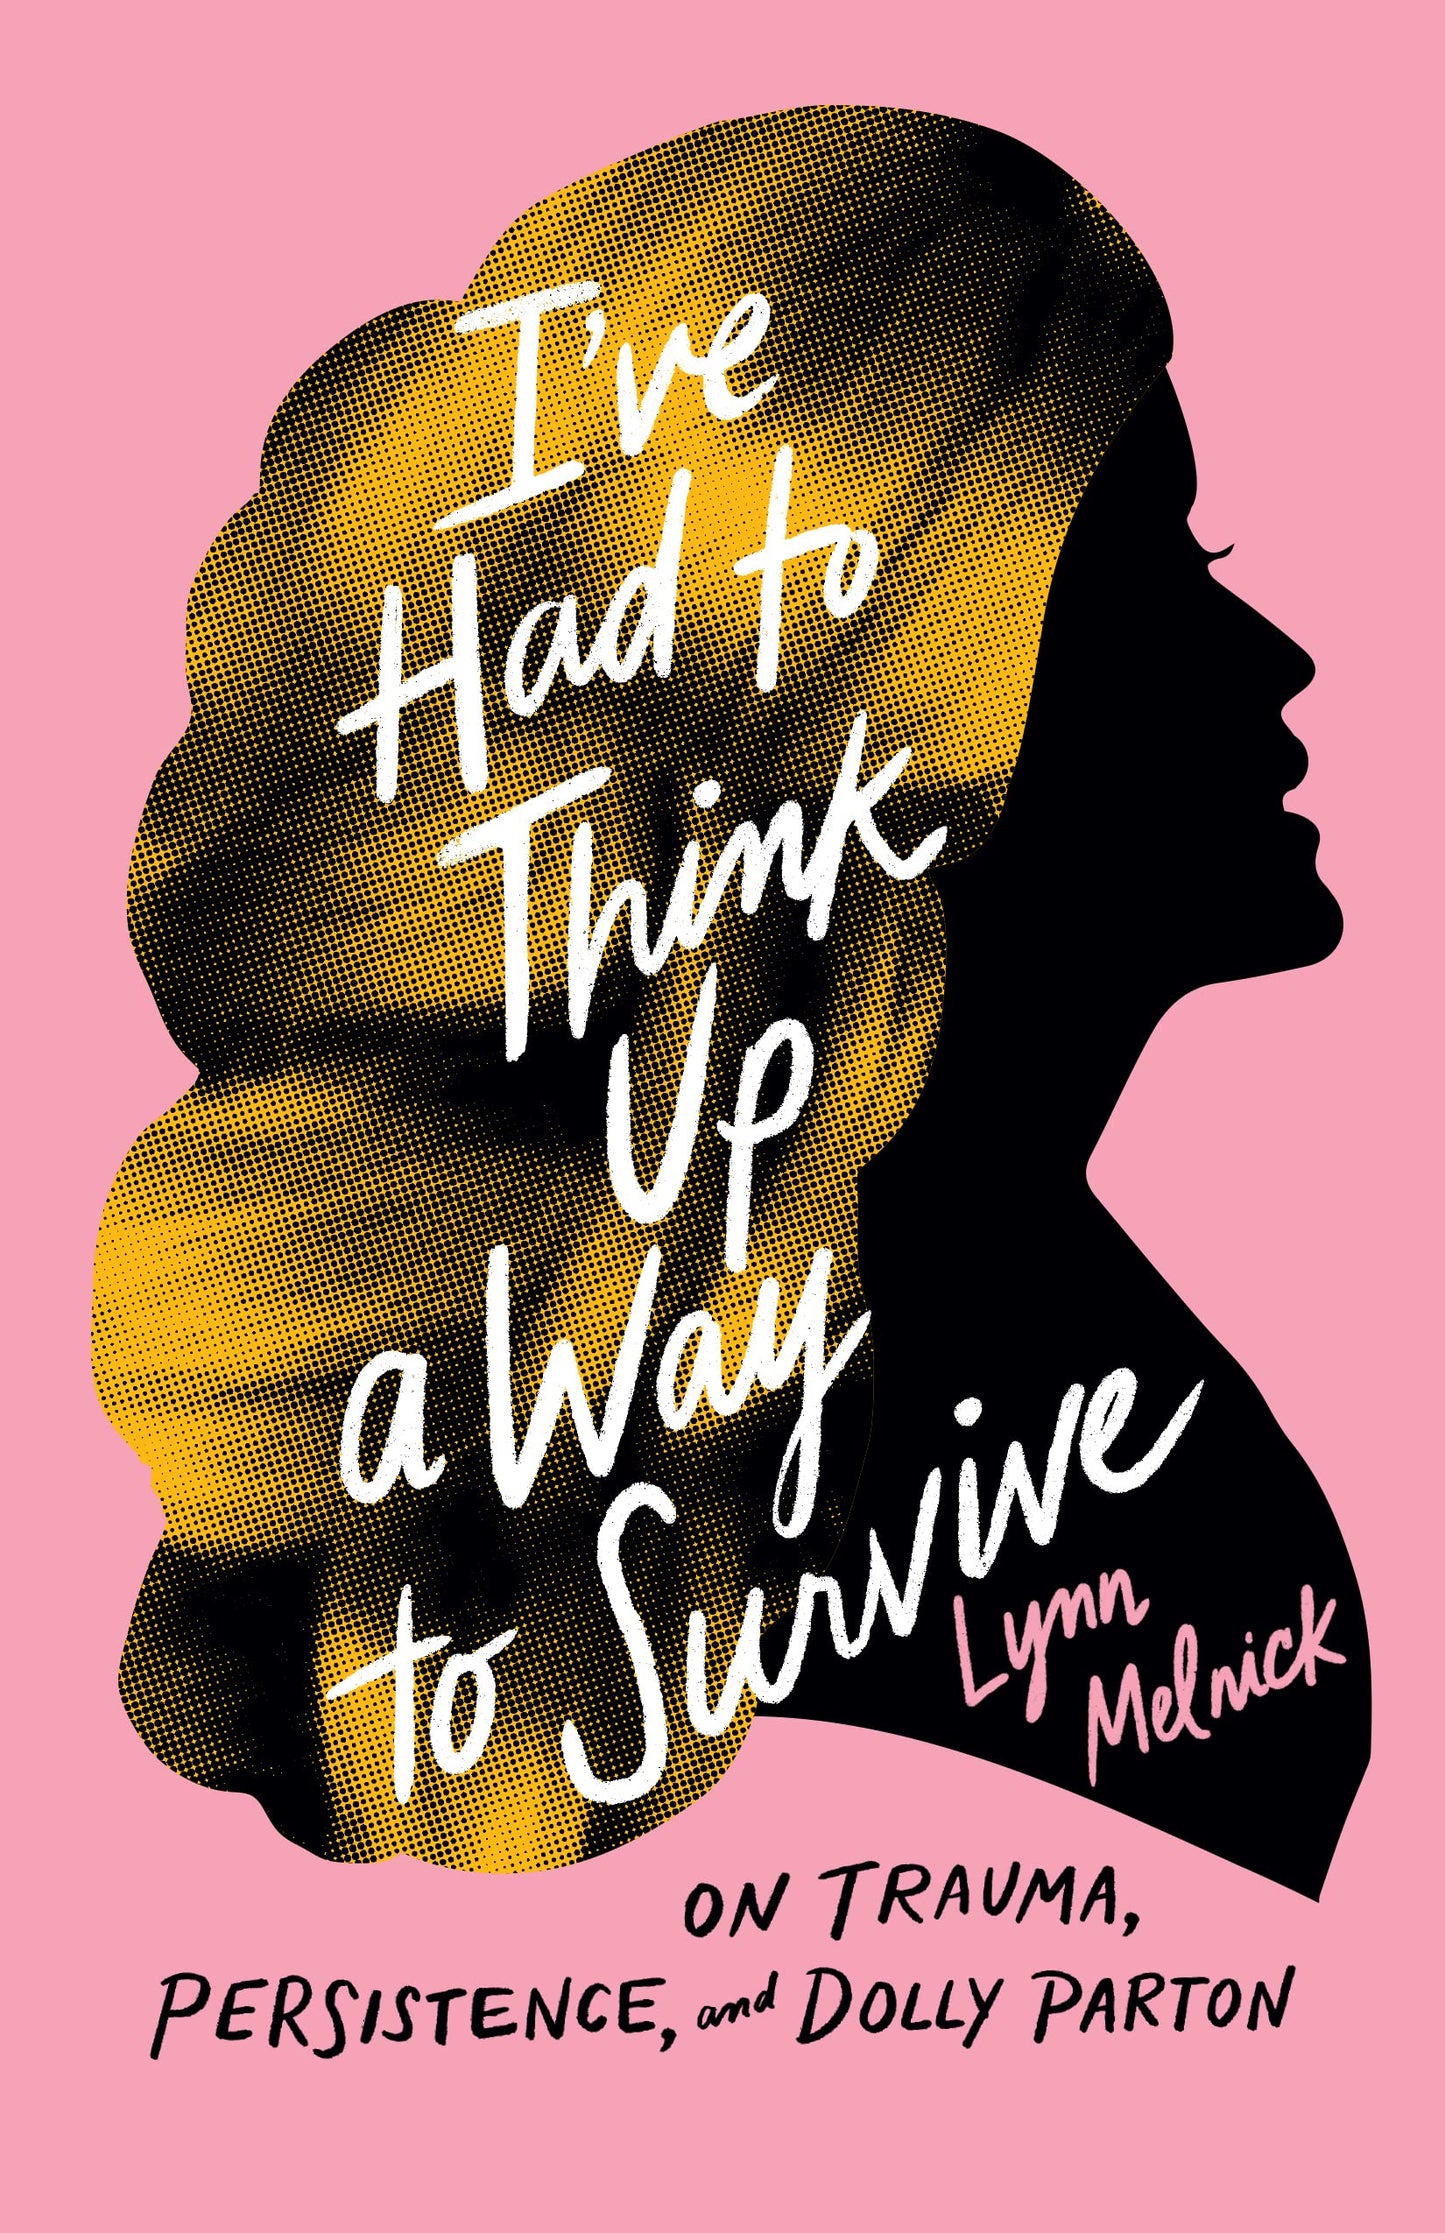 I've Had to Think Up a Way to Survive, by Lynn Melnick